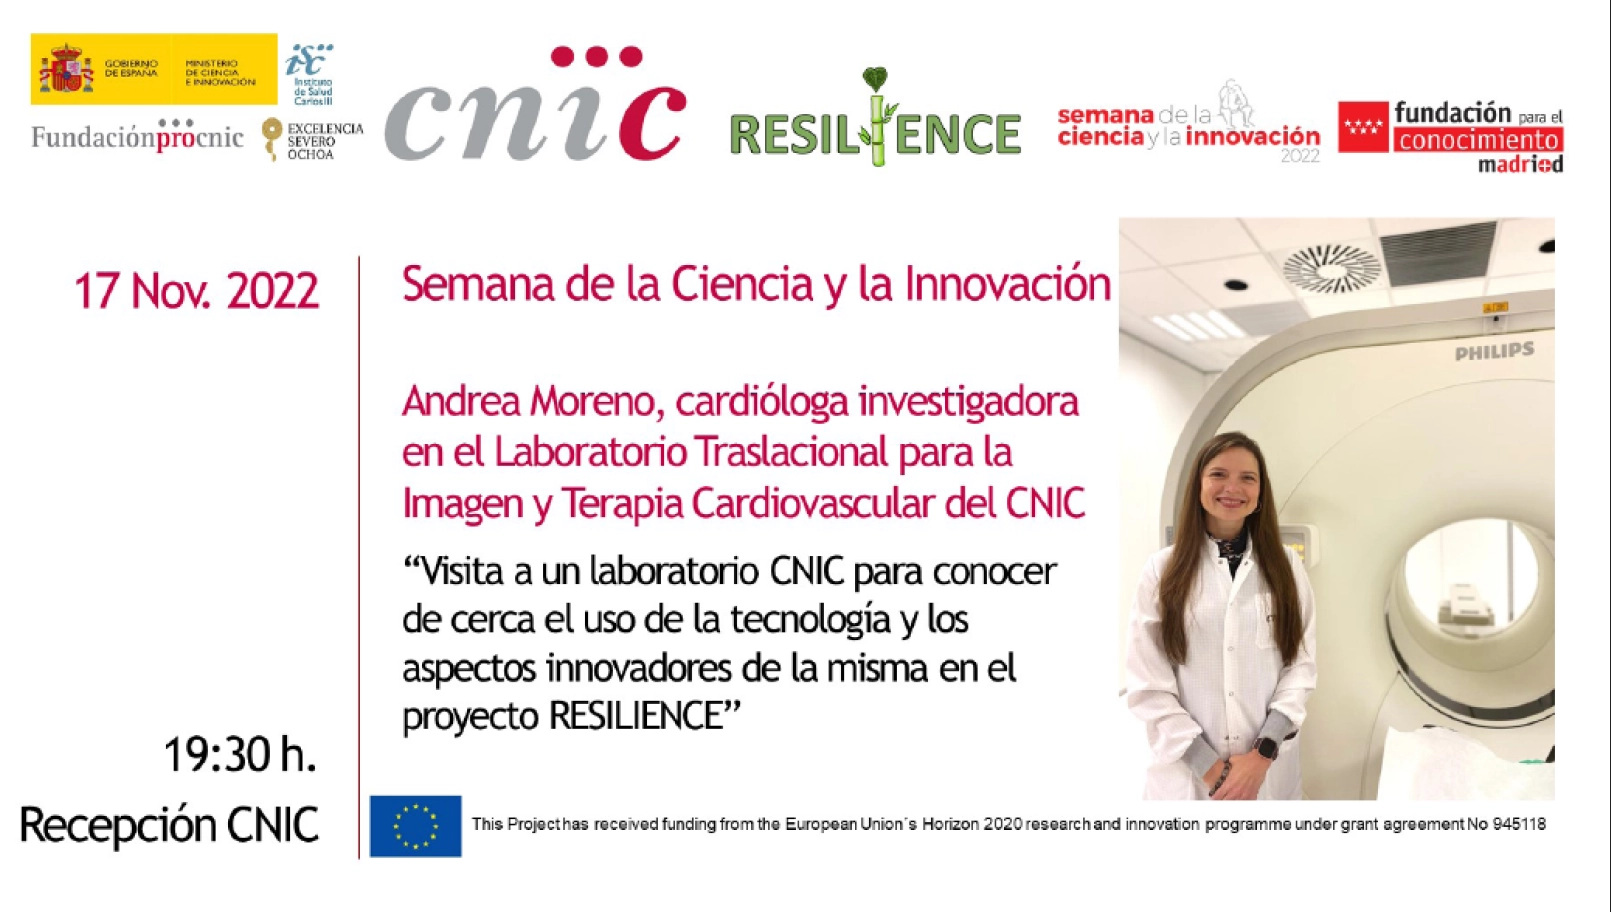 CNIC at the XXII Science and Innovation Week in Madrid